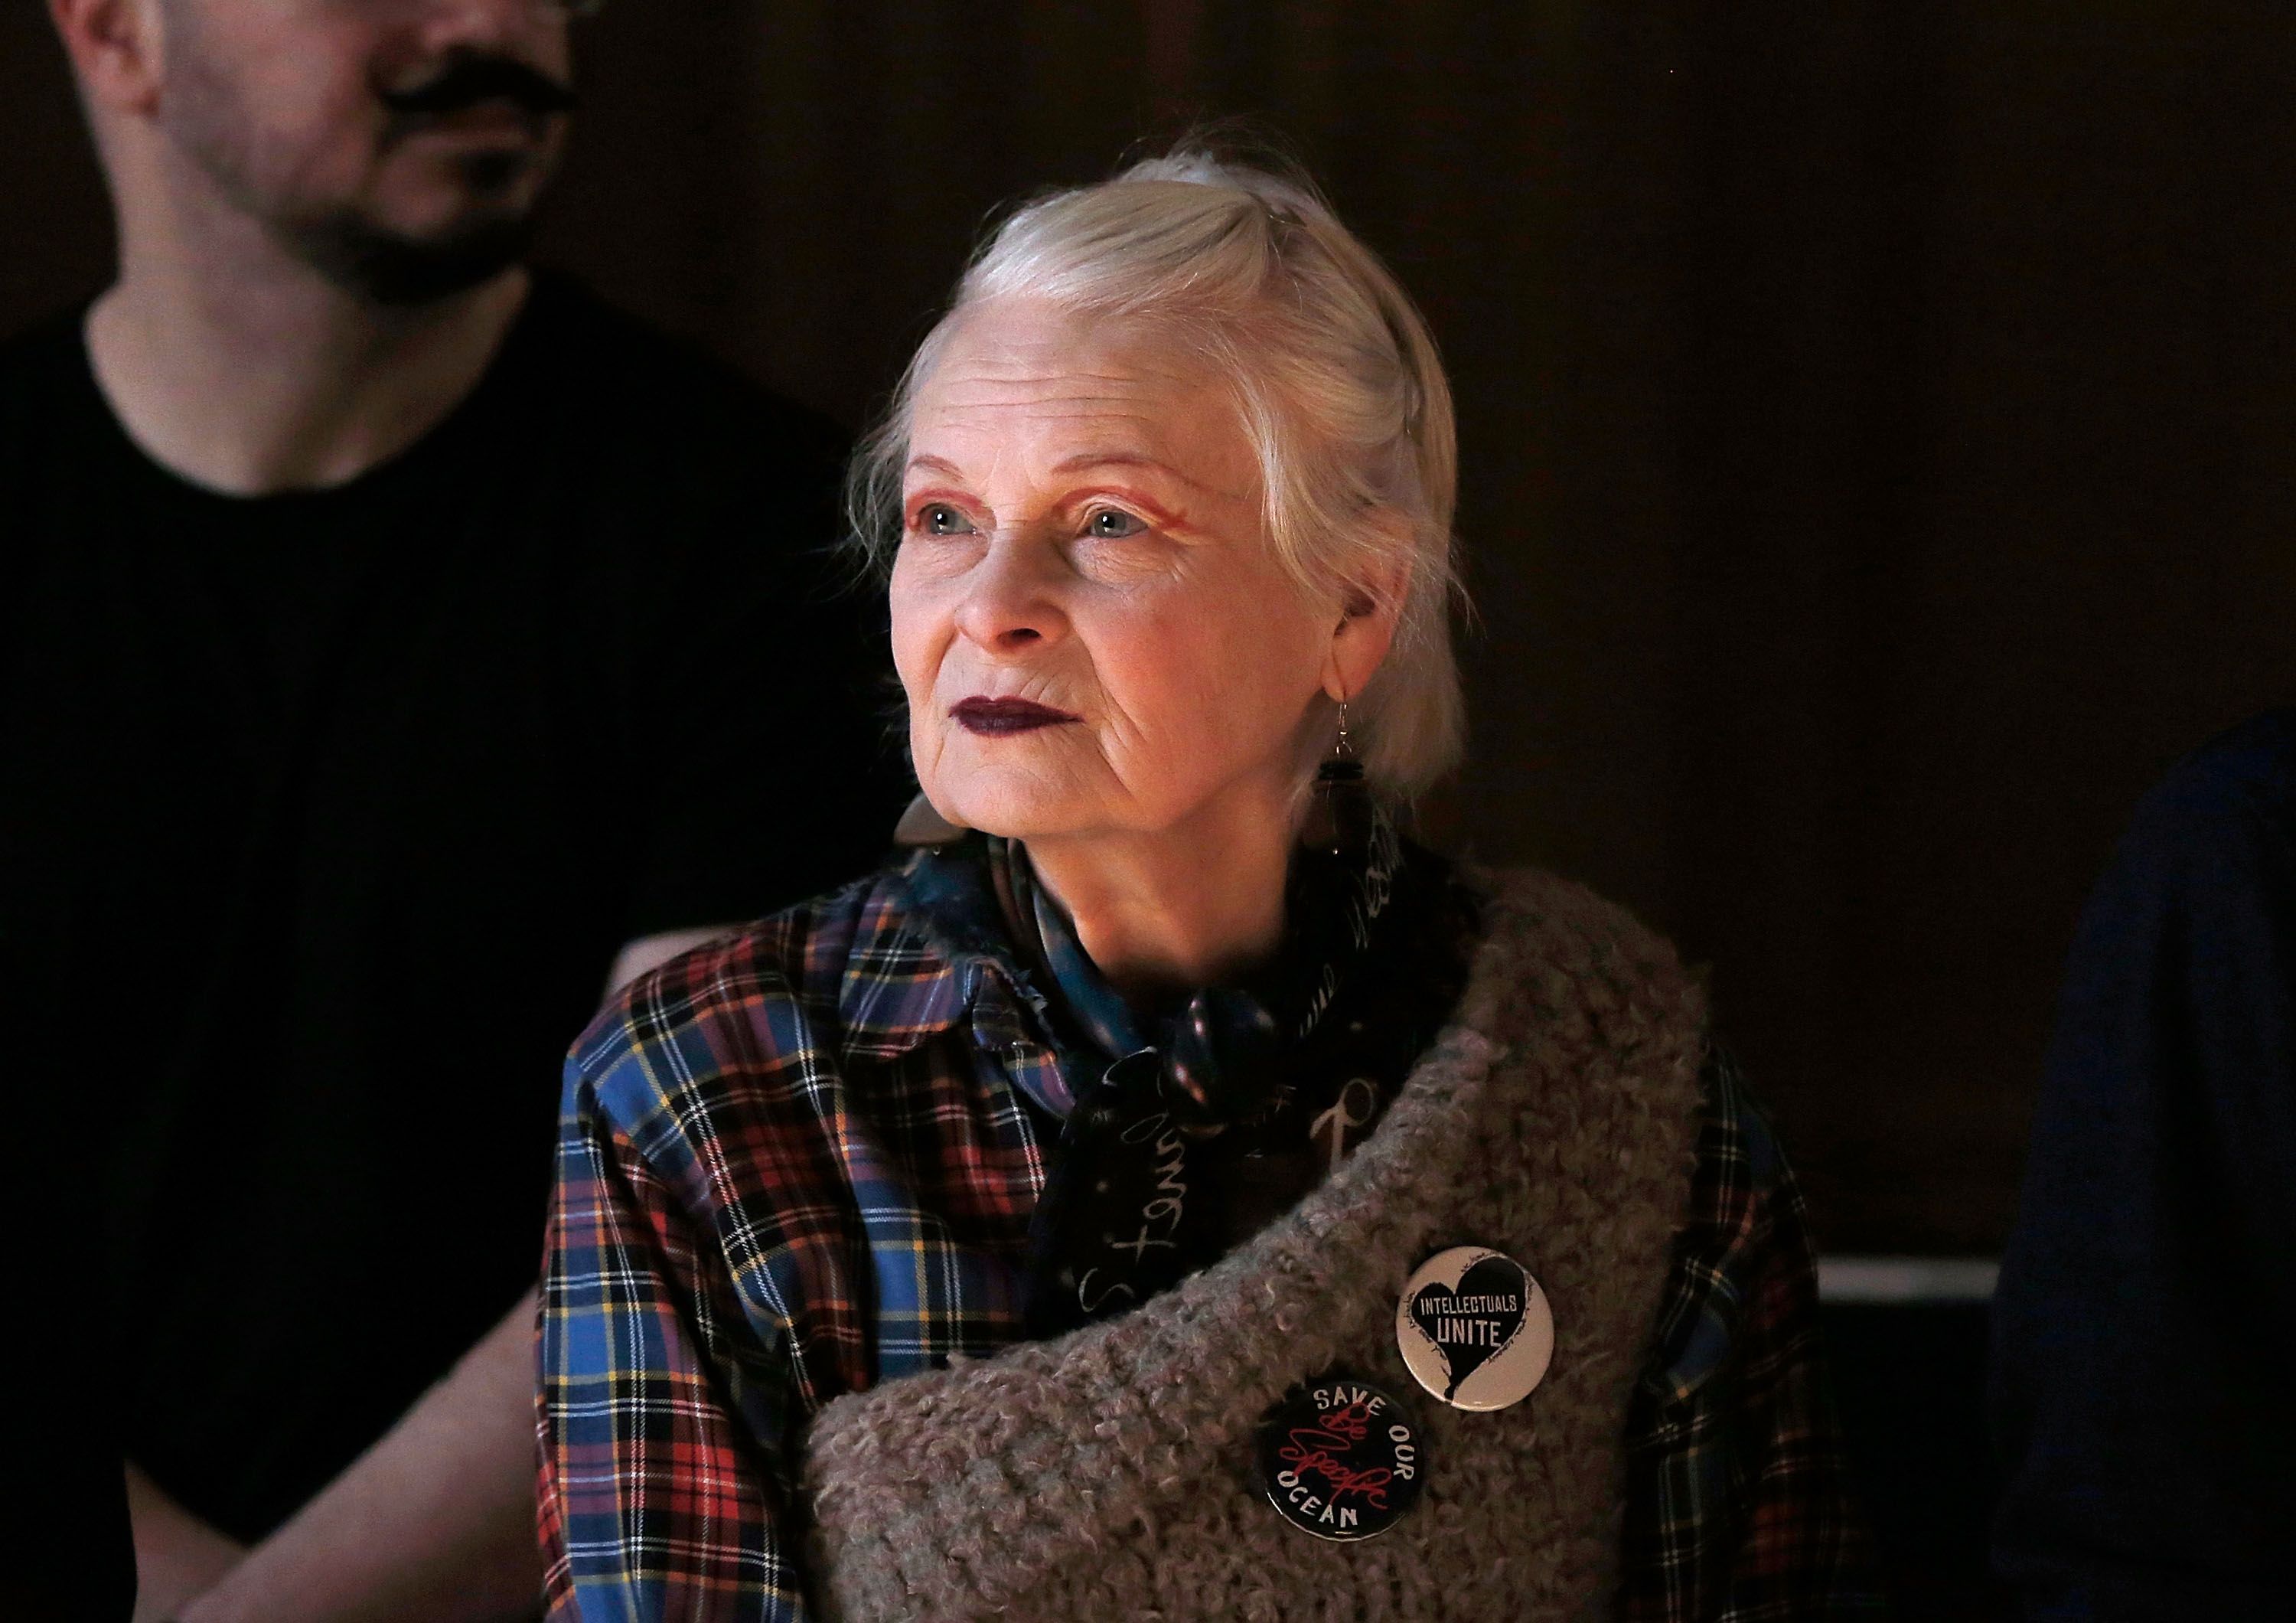 10 Of Dame Vivienne Westwood's Most Iconic Fashion Moments